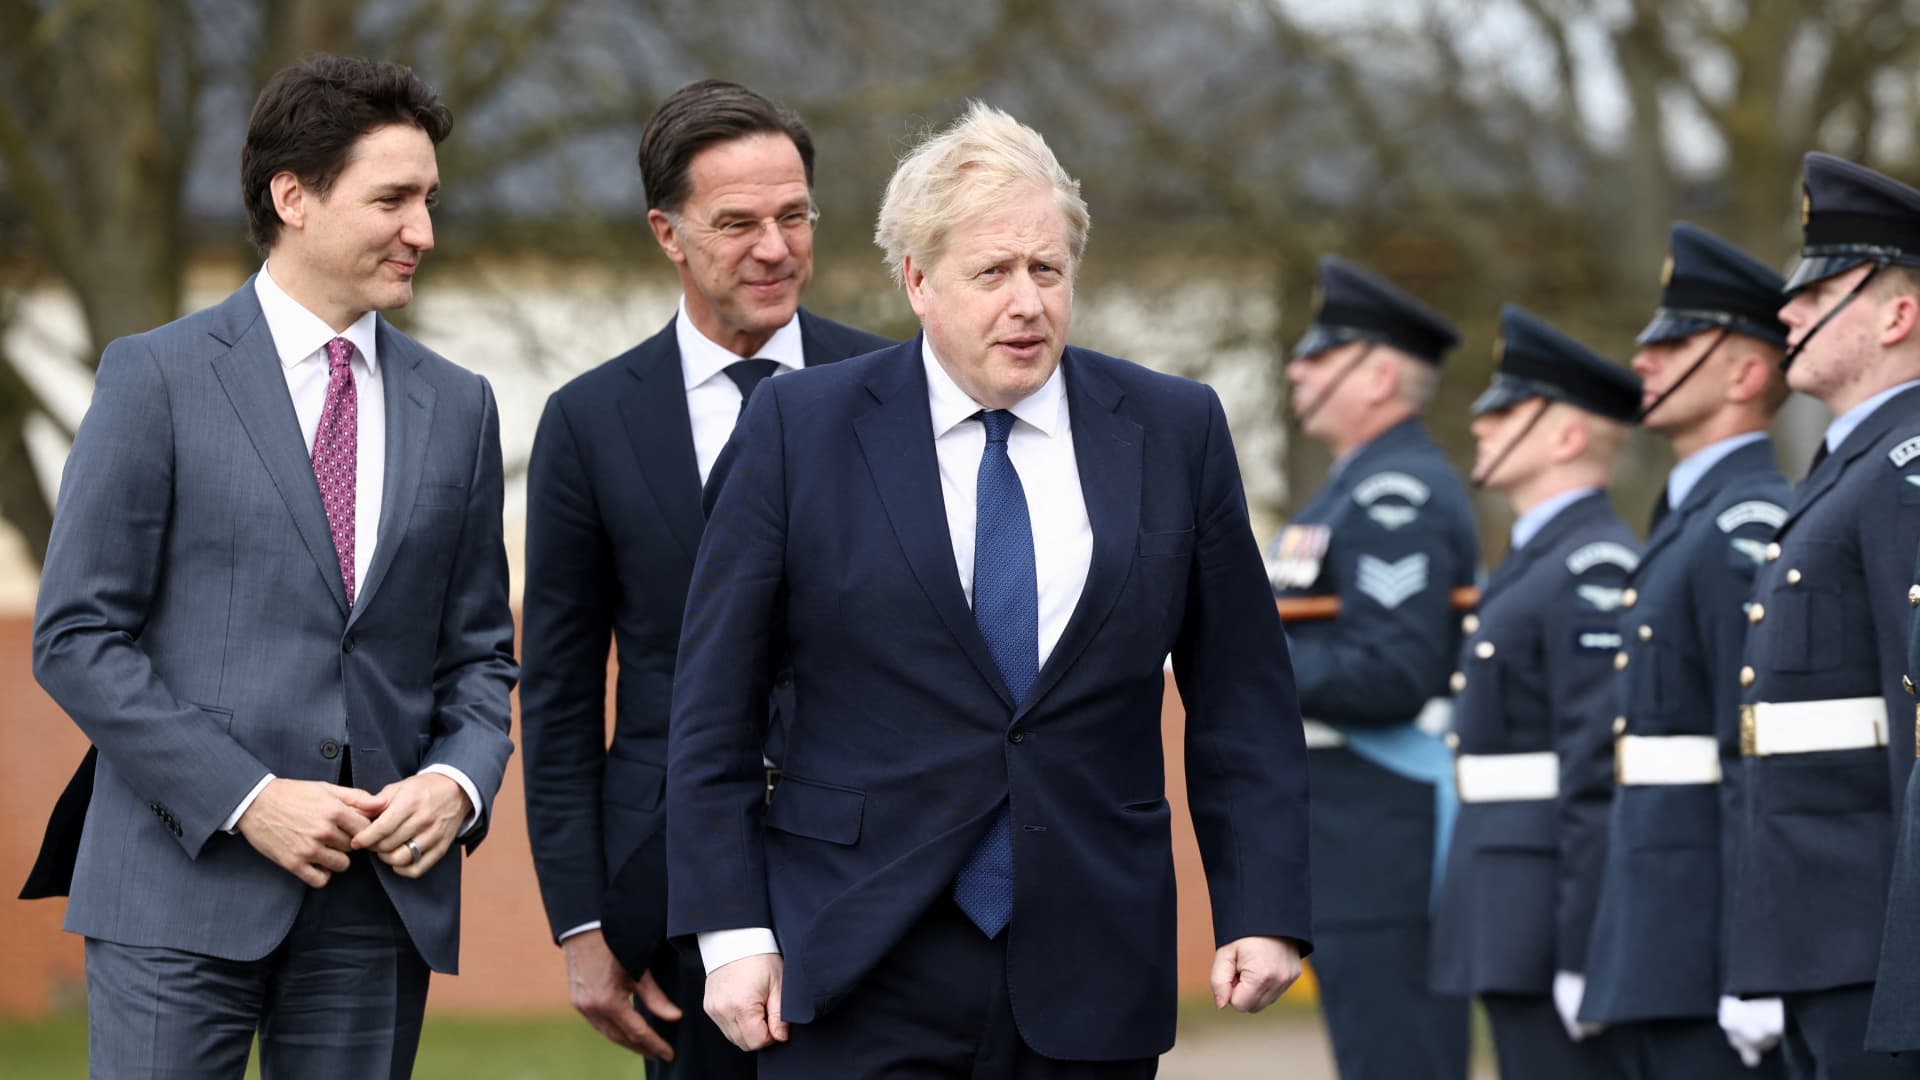 Canadian Prime Minister Justin Trudeau, Dutch Prime Minister Mark Rutte and British Prime Minister Boris Johnson at RAF Northolt on March 7, 2022 in London, England.